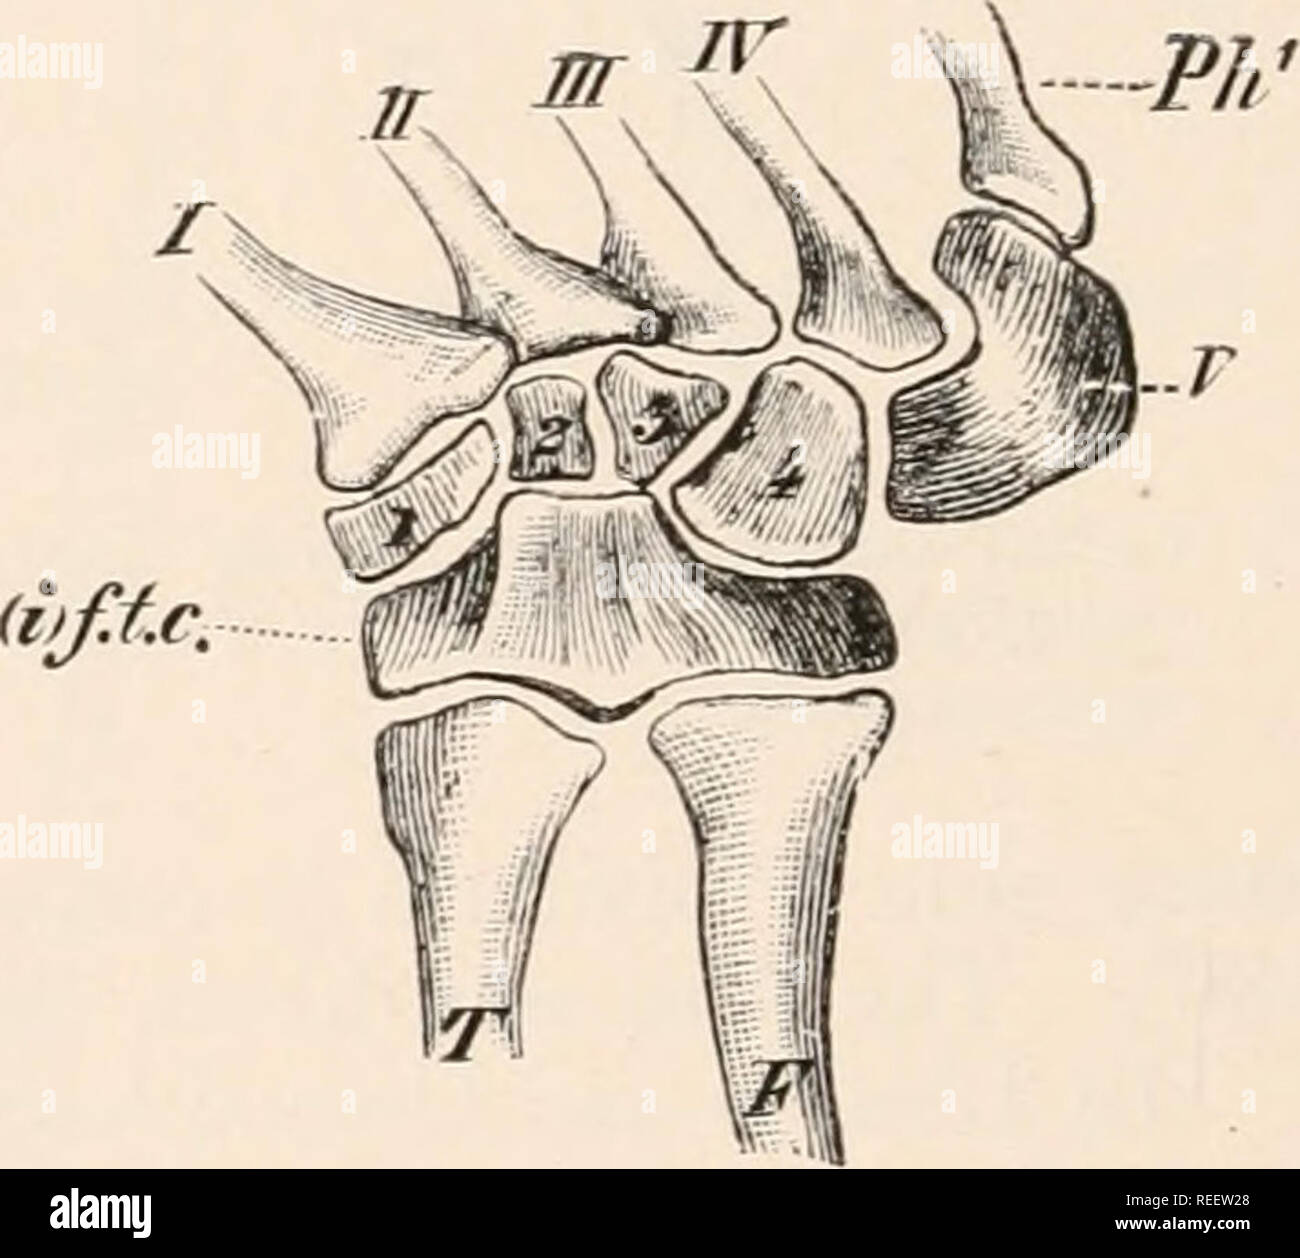 . Comparative anatomy of vertebrates. Anatomy, Comparative; Vertebrates. JT u FIG. 128.— RIGHT CARPUS OF A YOUNG Afliynfor lui-iitx. From above. C, centrale ; R, radius ; r, radiale ; U, ulna ; 11, ulnare ; t, pisiform ; 1 to 5, the five carpalia, as yet un- ossified, of which 1 and 2, as well as 3, 4, and 5, have become fused ; 7 — V, metacarpals.. FIG. 129.—RIGHT TARSUS OF Emy« enropwa. From above. F, fibula ; (if.f.f, the fused inter- medium^), fibulare, tibiale, and centrale ; Phl, phalanx of 1st digit; T, tibia; 1—4, distal tarsals; /— I', metatarsals. reduction of the extremities occur, Stock Photo